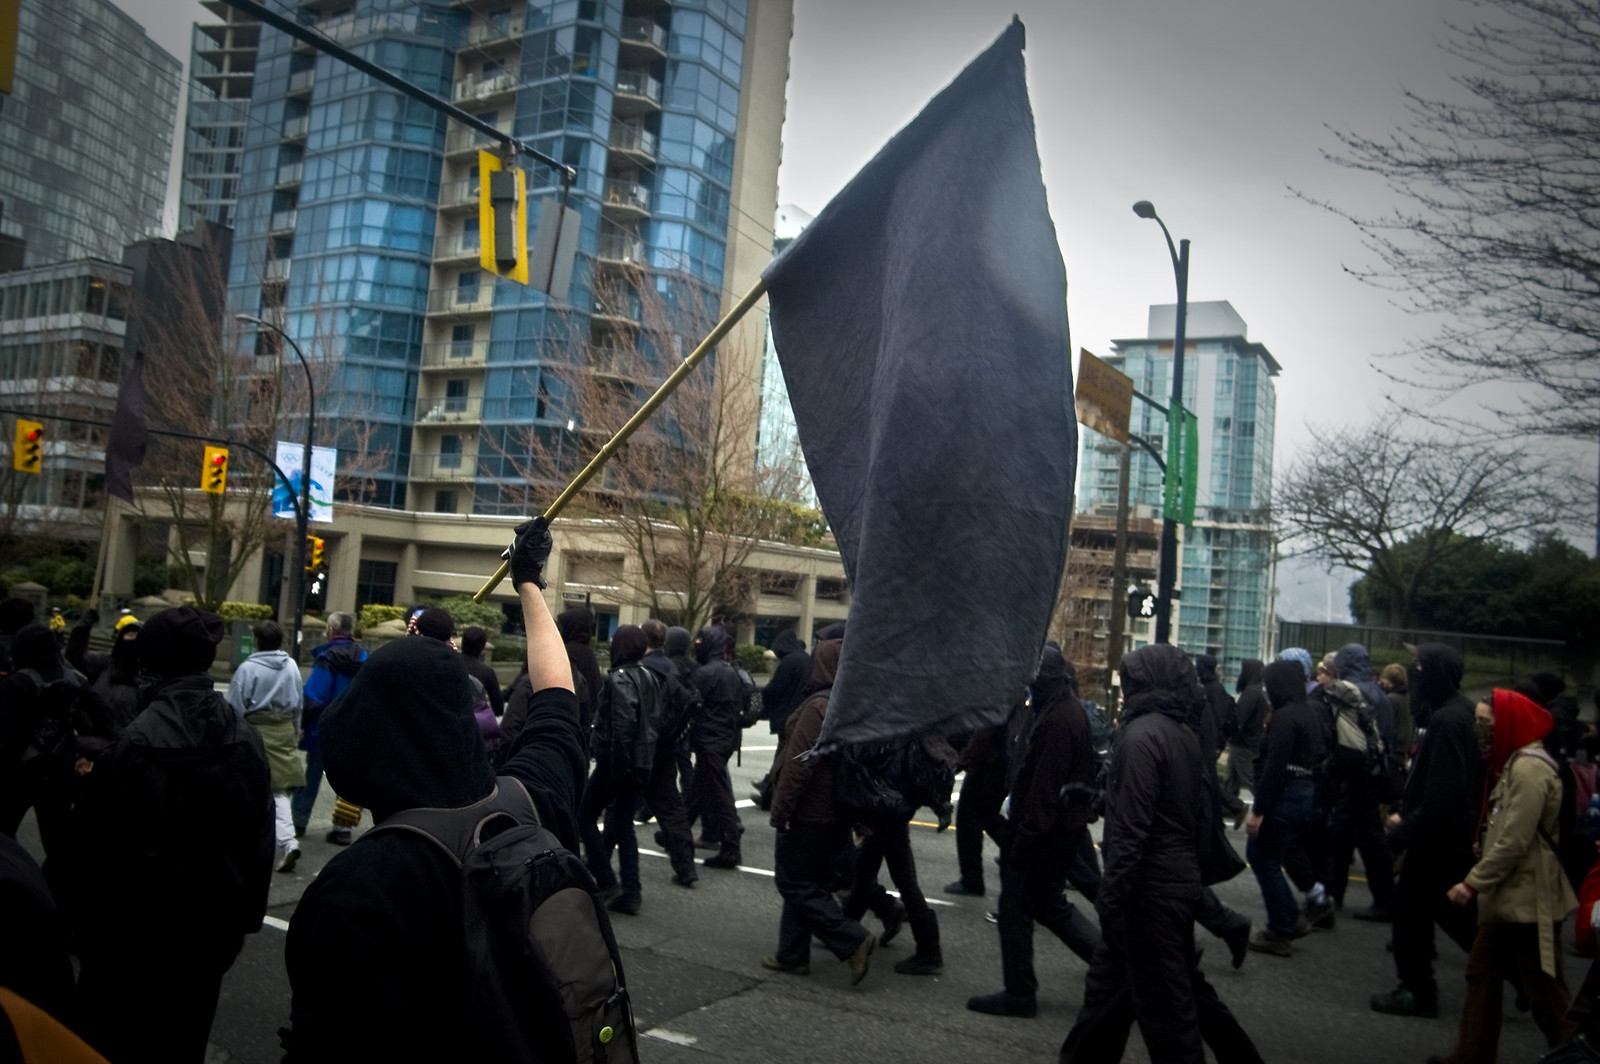 A group in black bloc dress walking laterally across the video, one person waving a large black flag